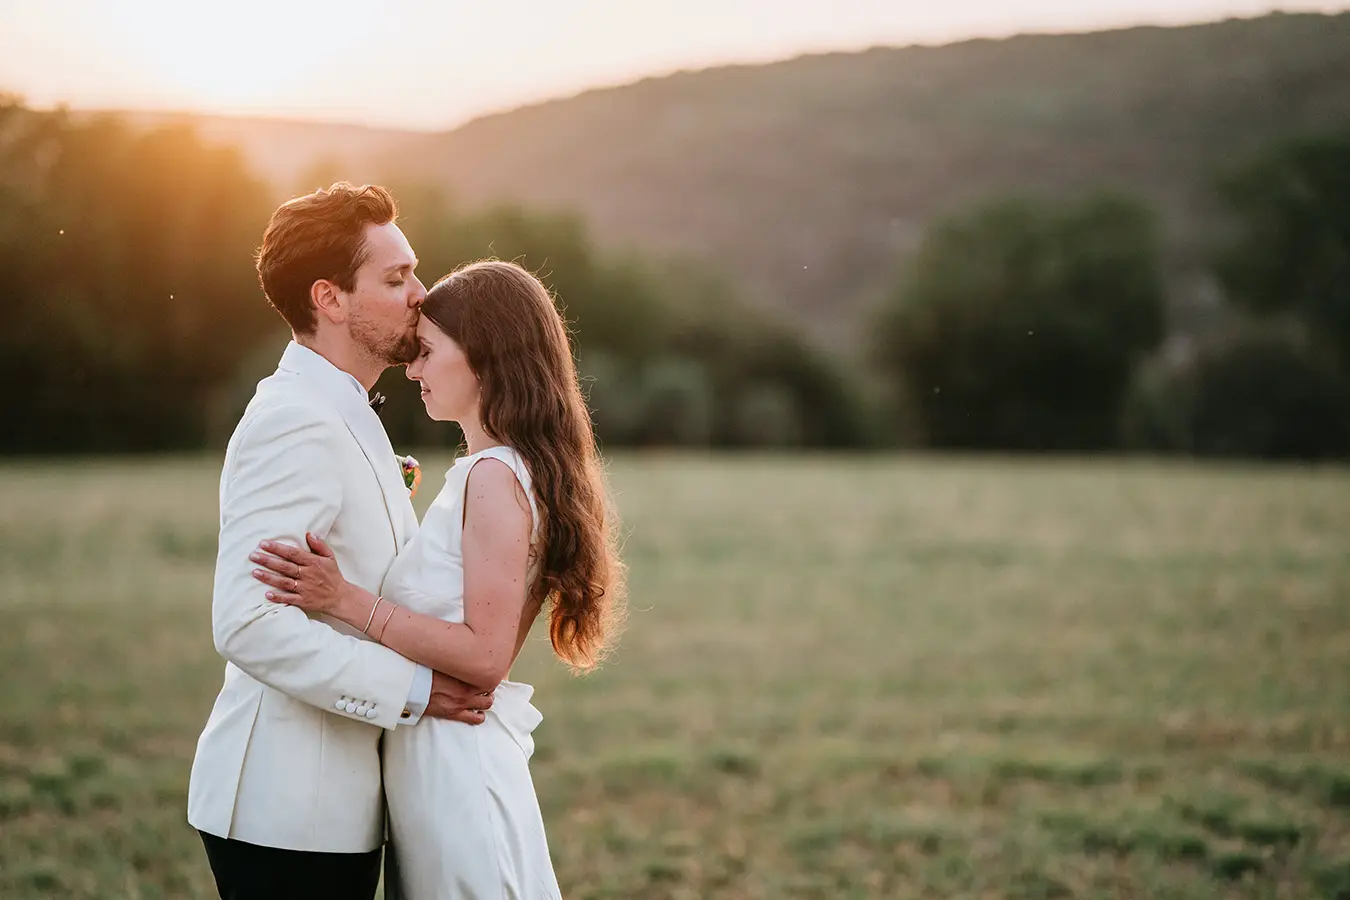 An Unforgettable Wedding: Three Days of Bliss with Estée and Elliot